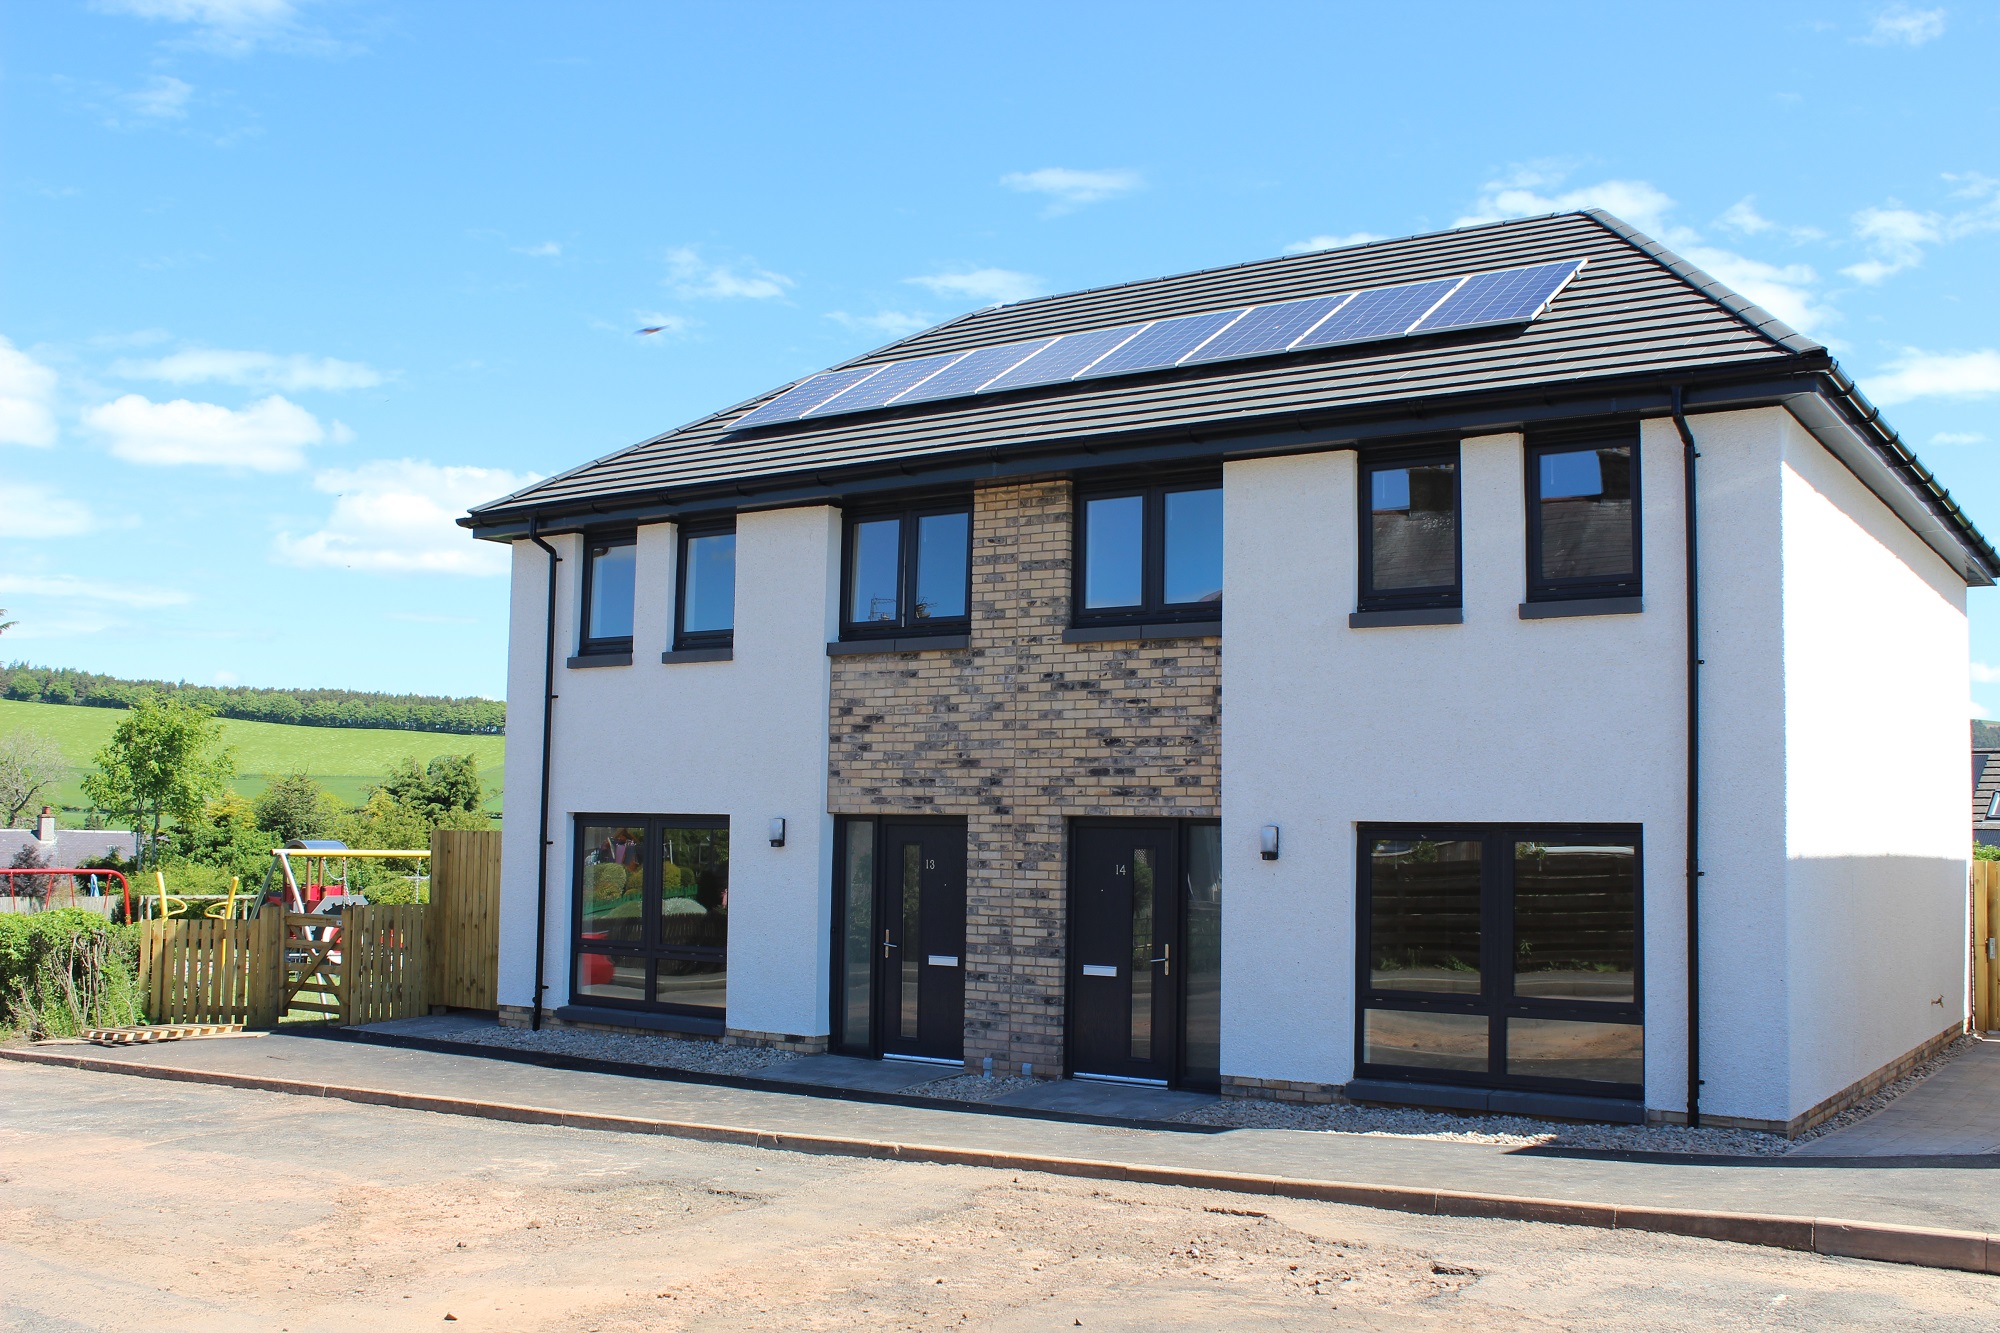 Scottish Borders Housing Association secures £58m funding facility from RBS